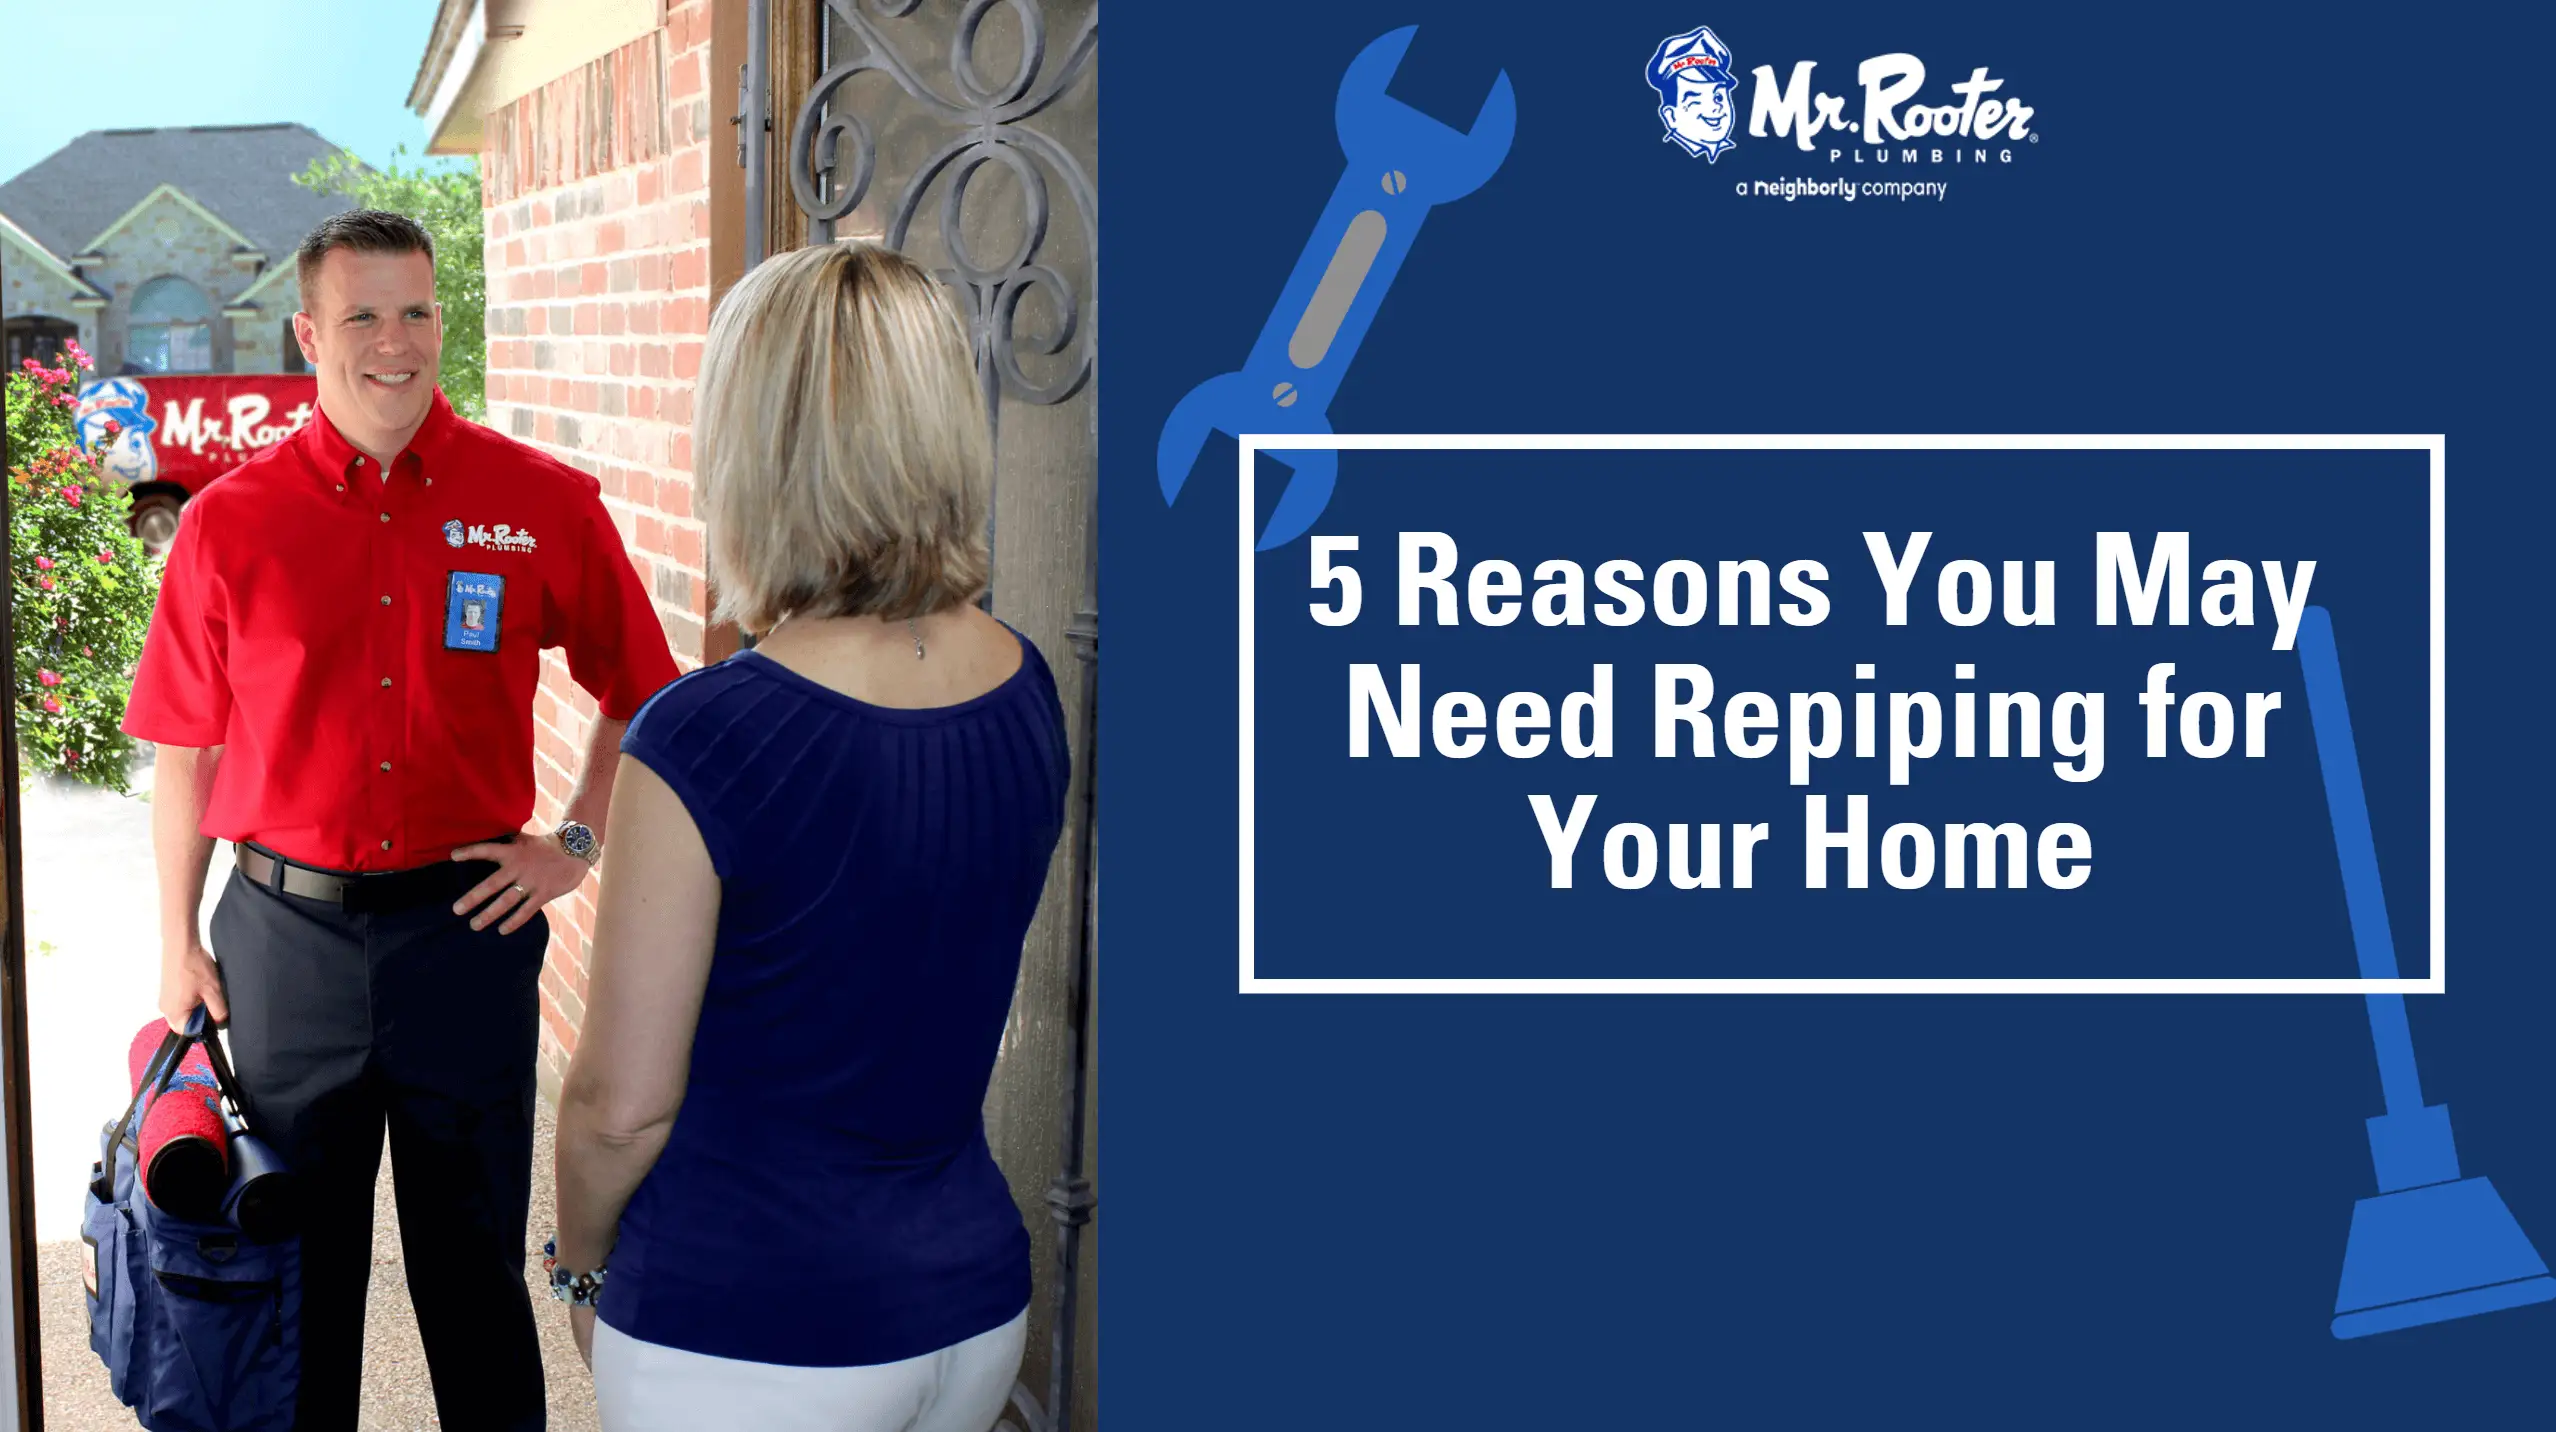 5 Reasons You May Need Repiping for Your Home